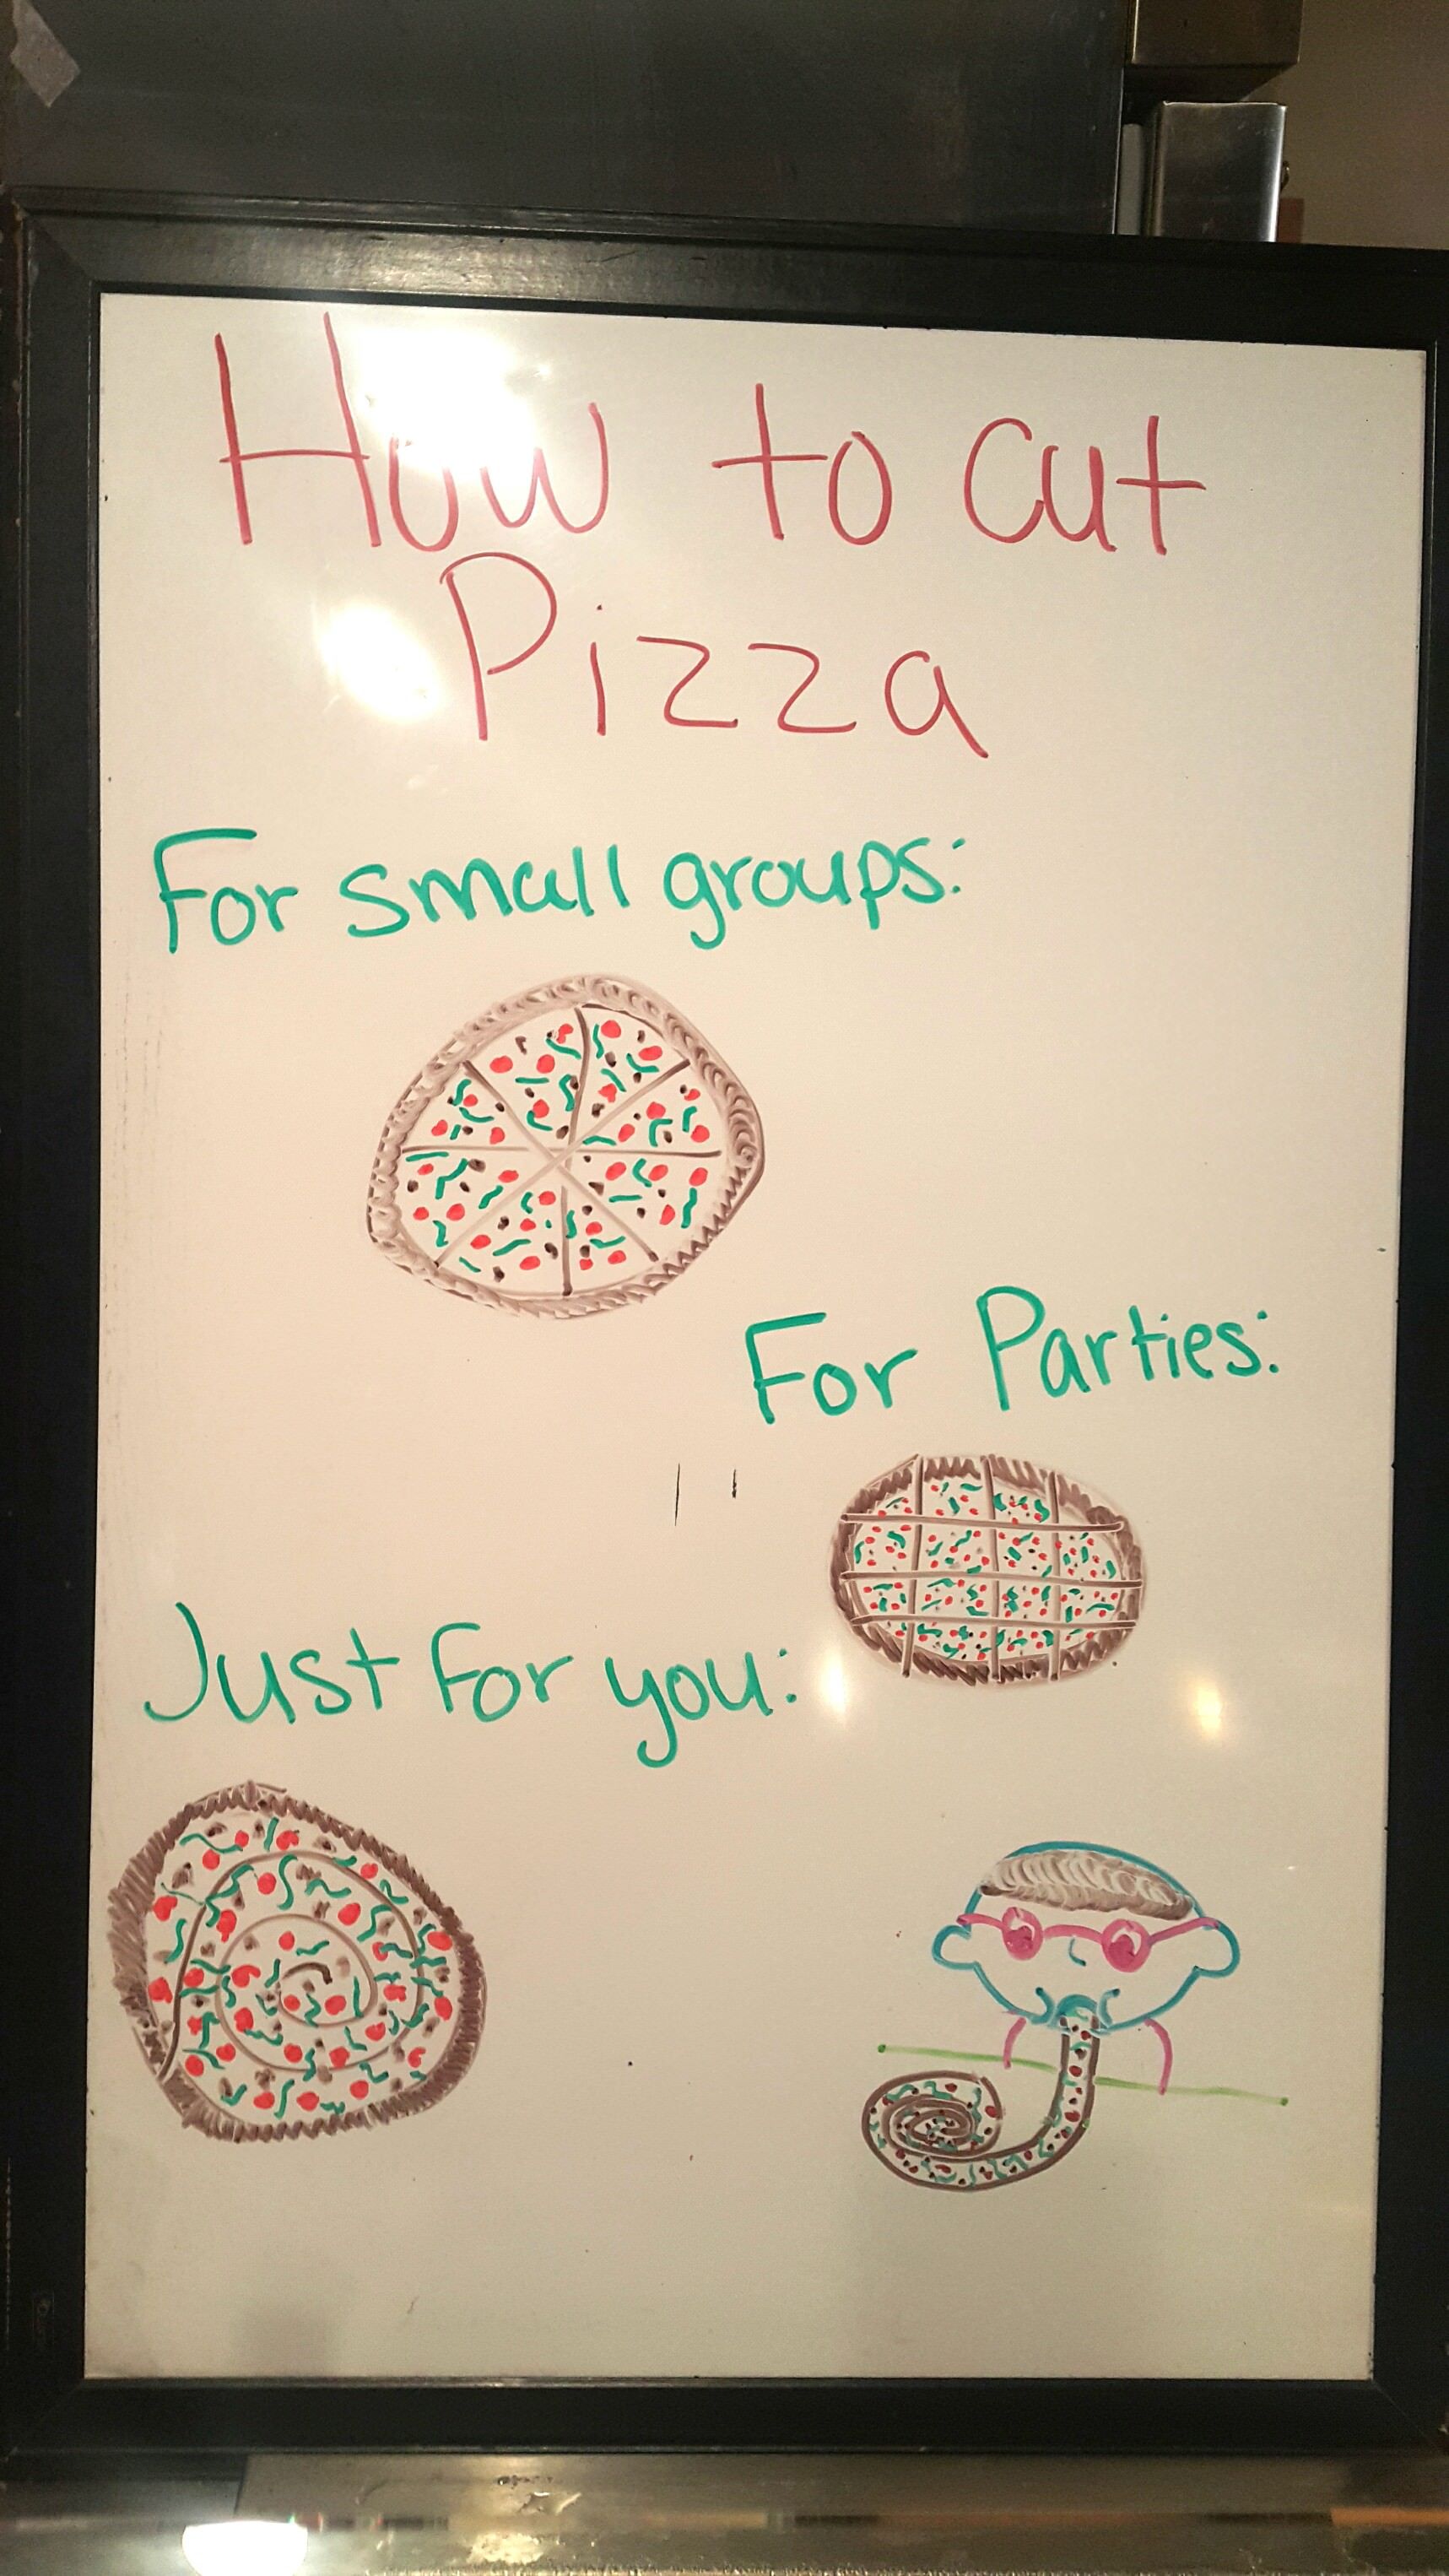 Our local pizza place gives excellent advice.